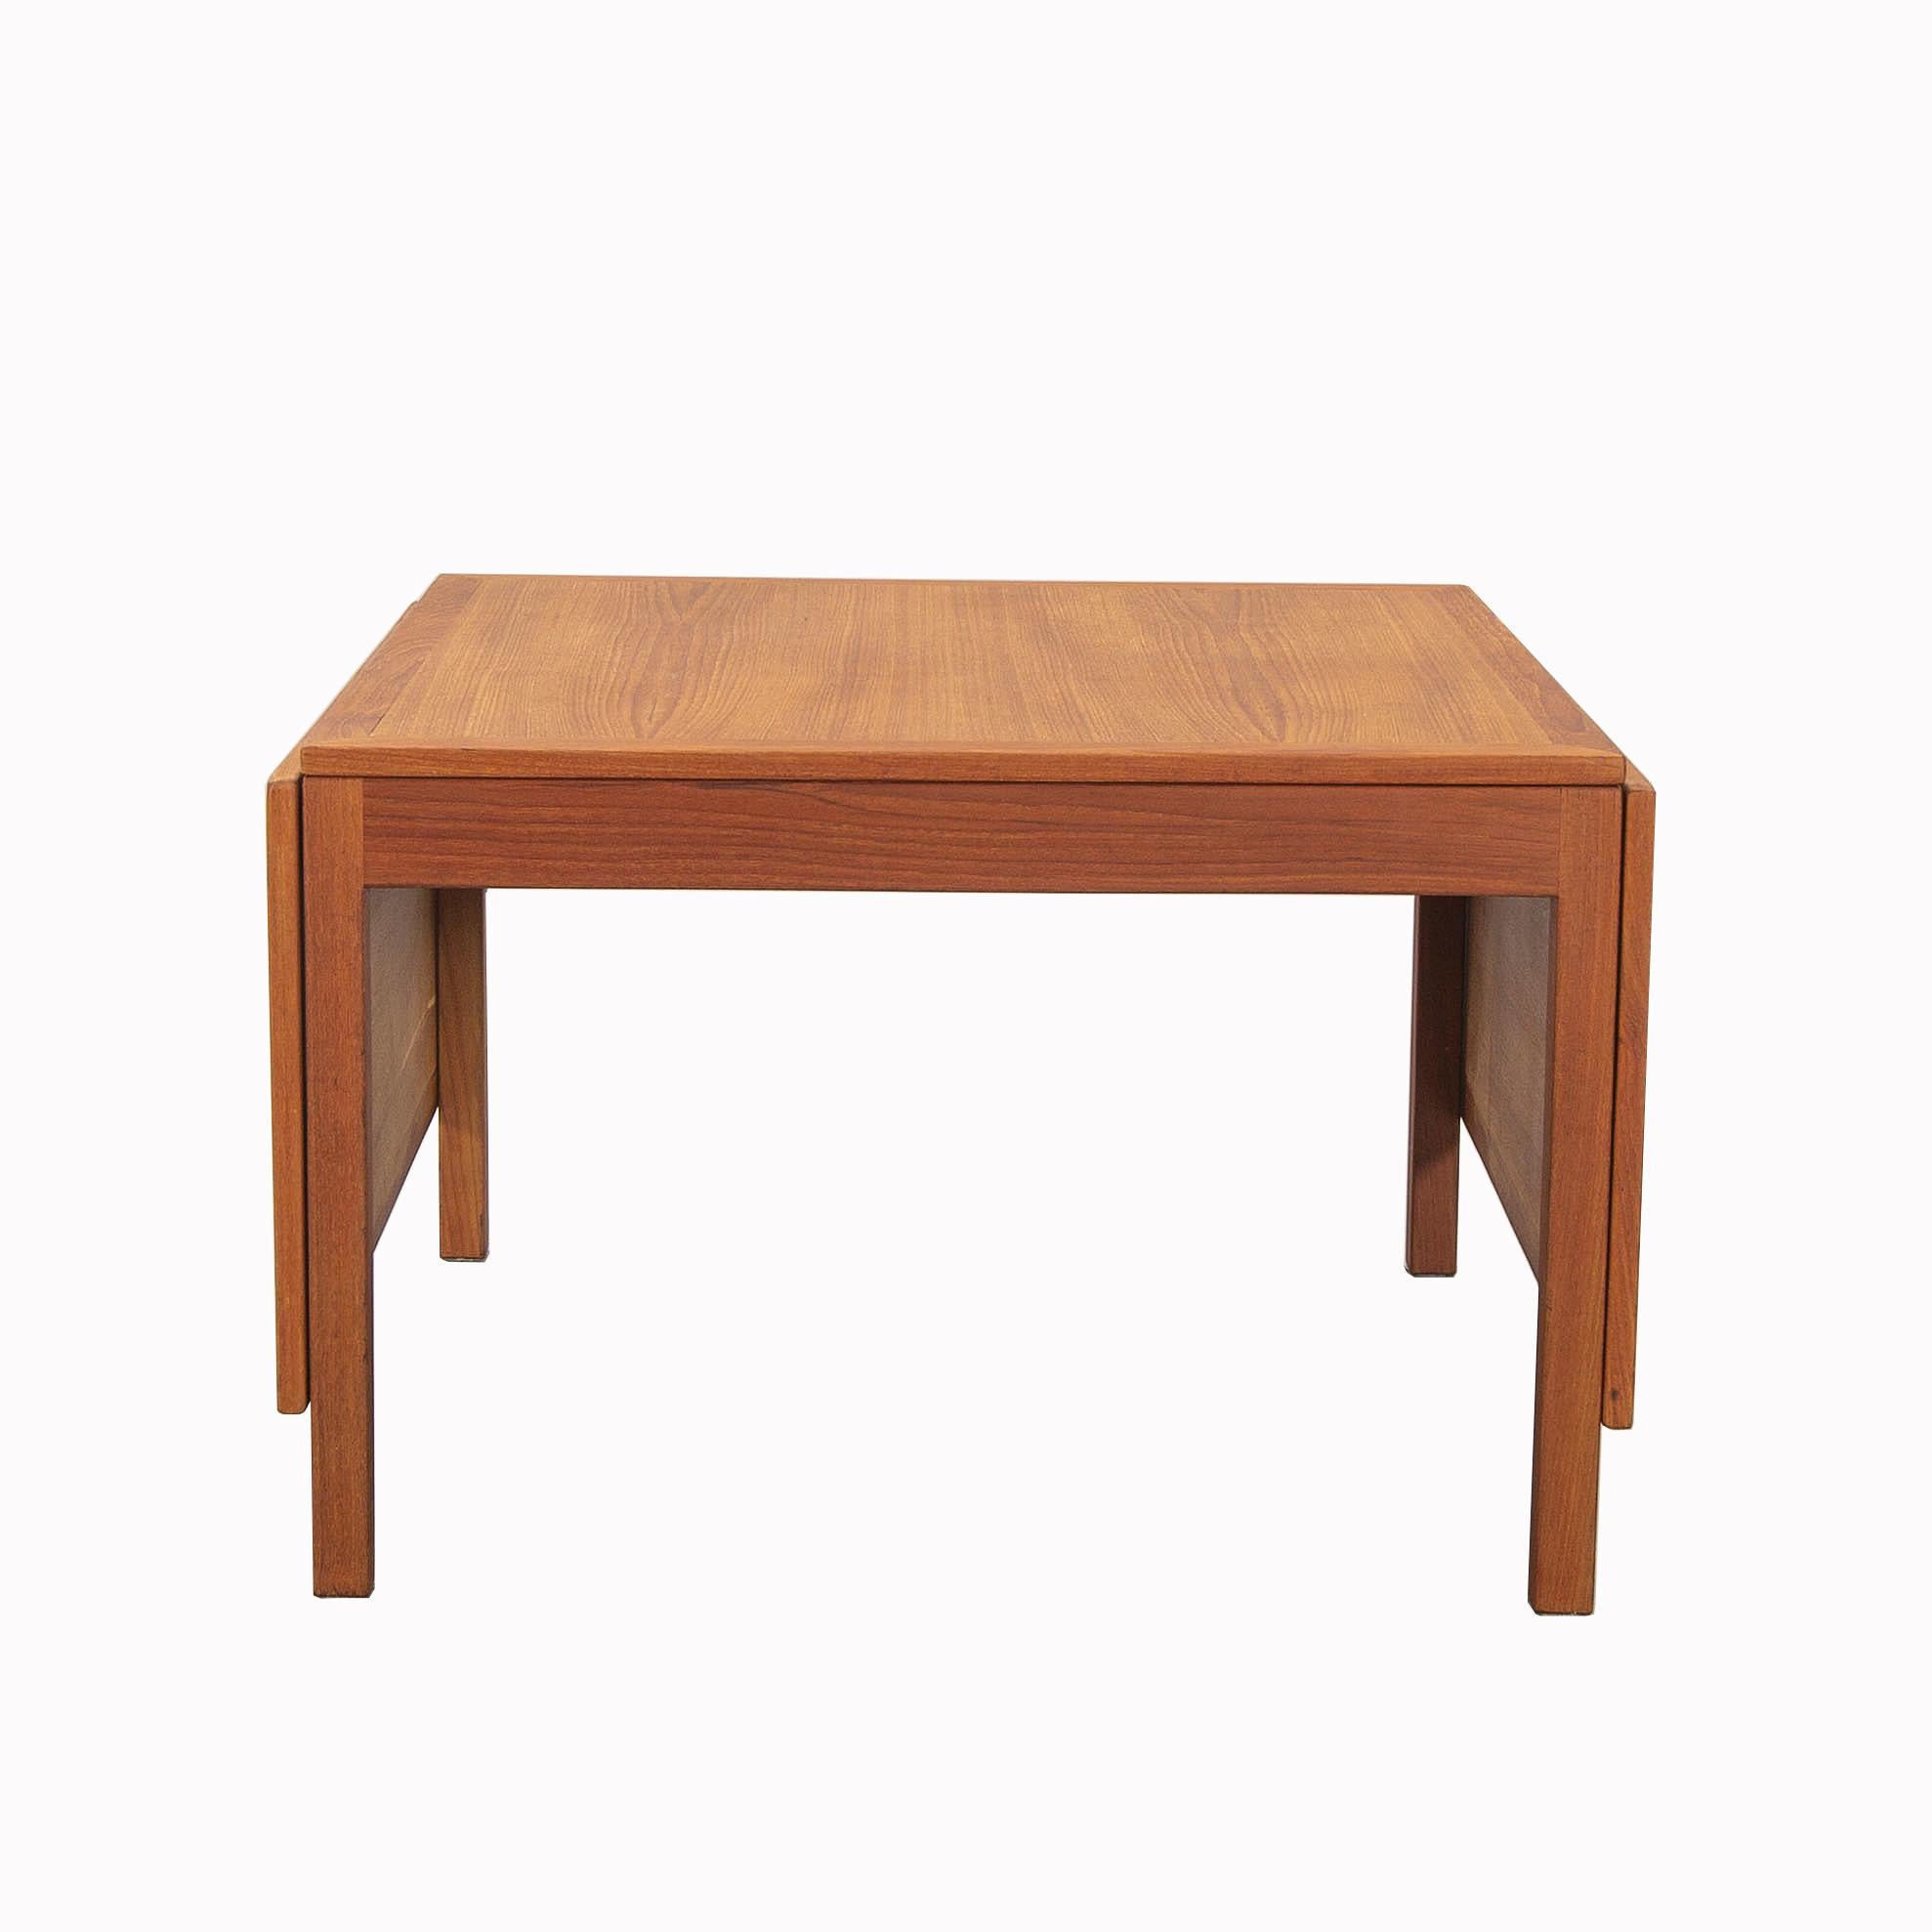 Børge Mogensen (1914-1972)

5362

A square teak coffee table with two liftable extensions.
Model 5362.
Manufactured and labeled by Fredericia Stolefabrik.
Denmark.
1970s.

Dimensions
Height : 54 cm
Width : 80 cm
Width with extensions